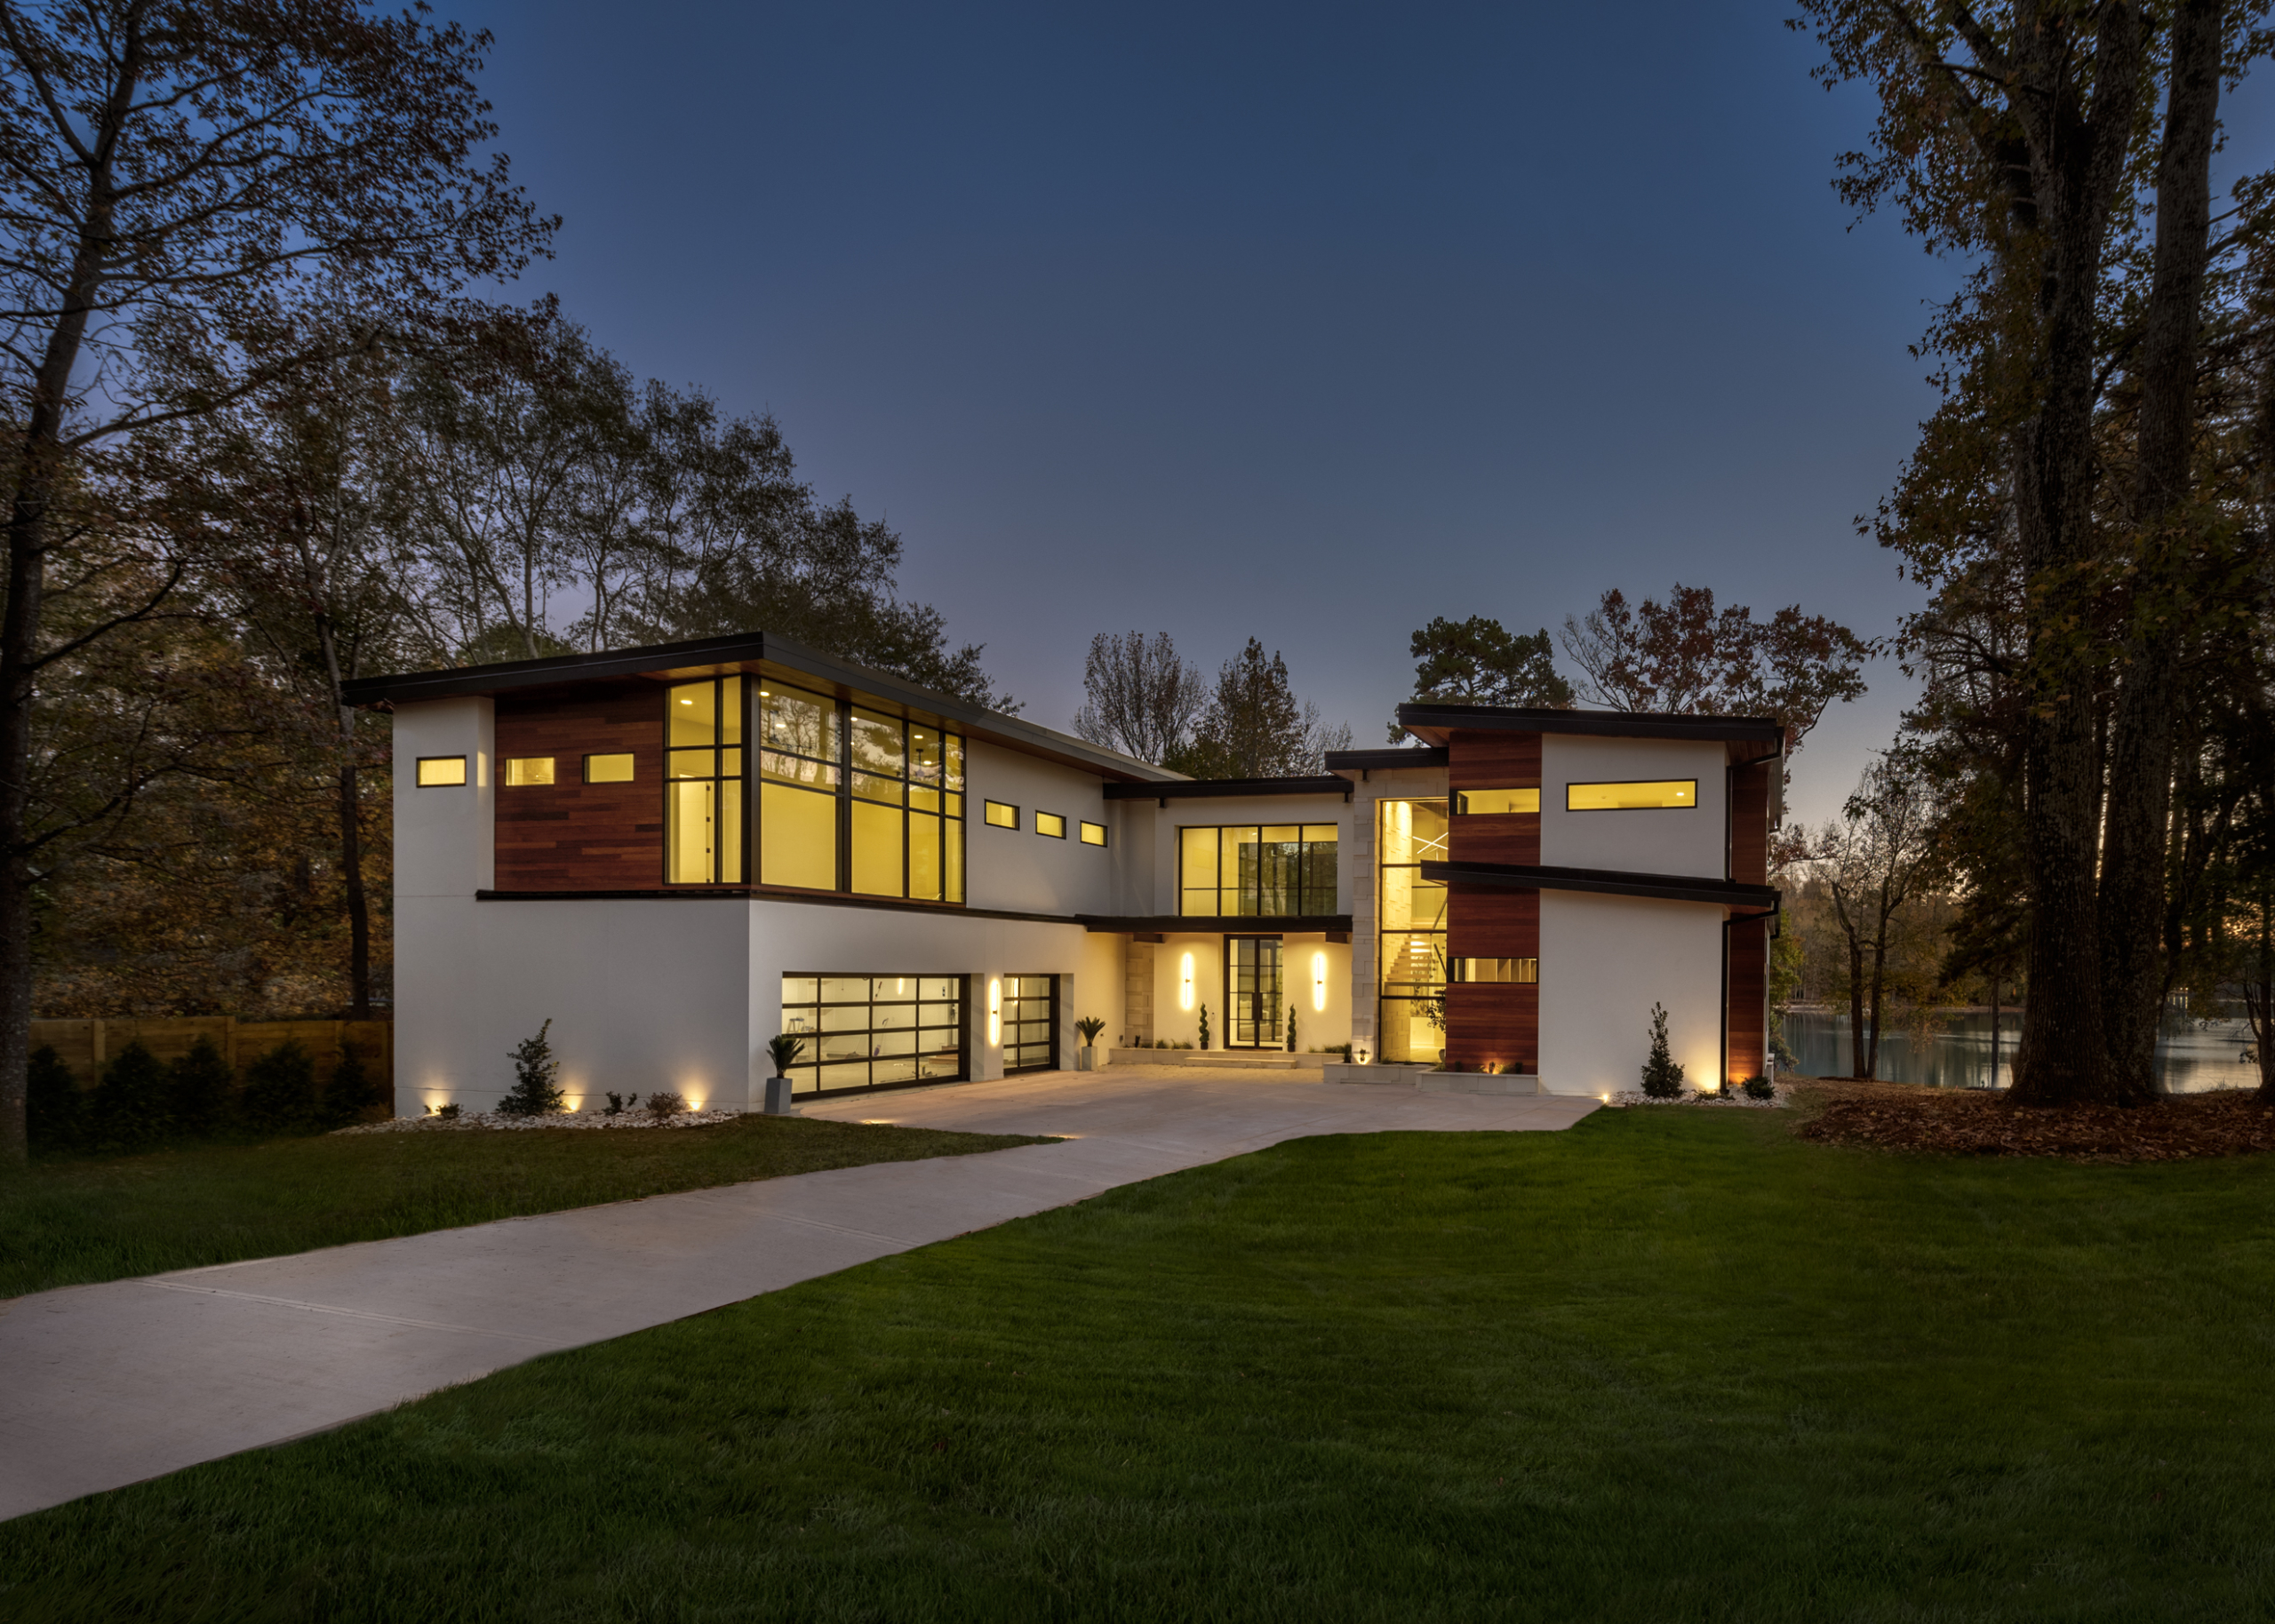 Modern contemporary home at night with white hard coat stucco walls, cumaru wood, floor to ceiling windows